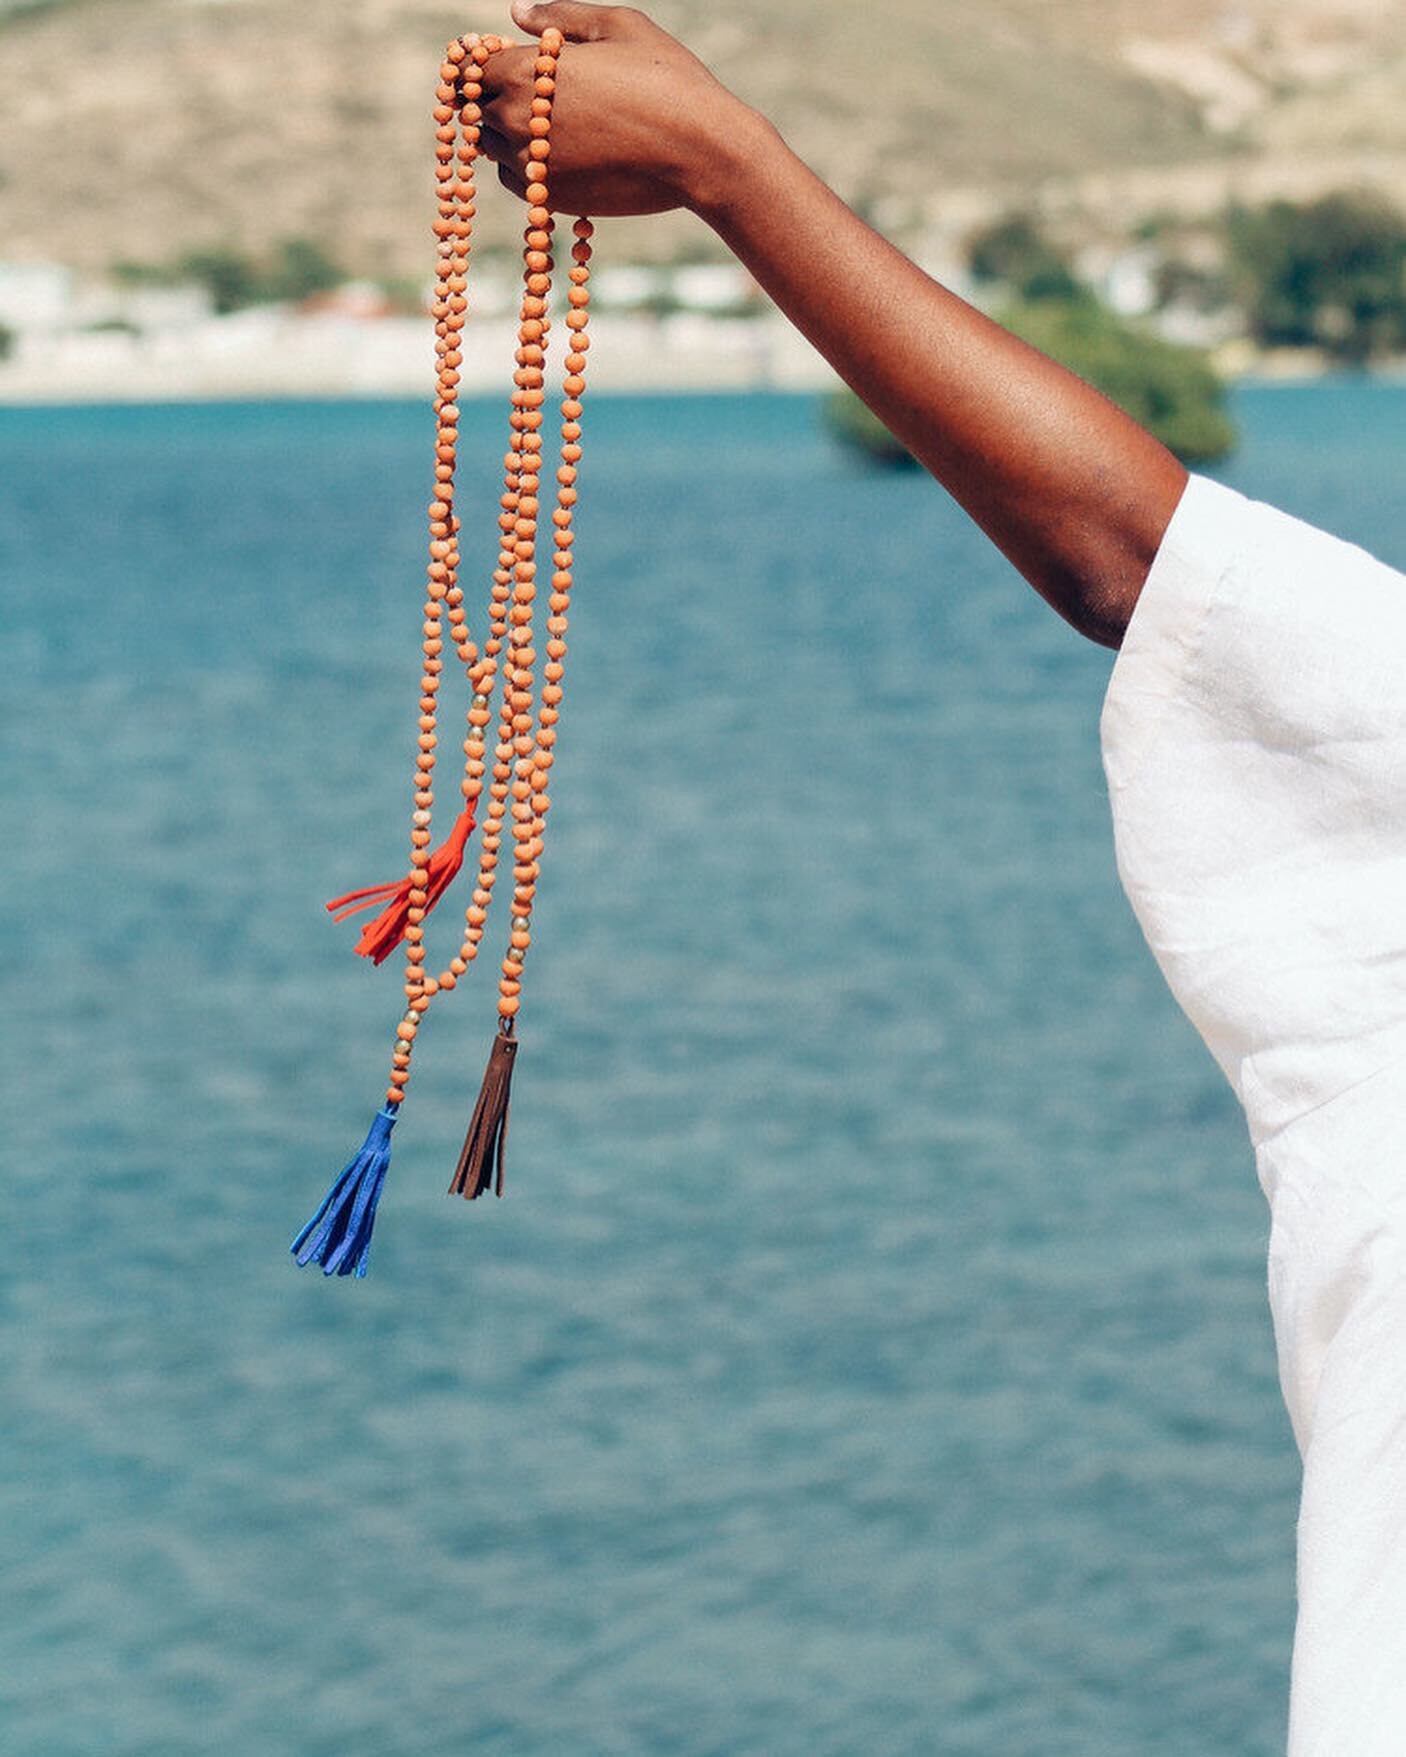 This simple necklace is packed with soul. Handformed &quot;ajil&quot;, Haitian clay beads in all their beautifully imperfect glory. Add essentials oils if that's your thing. Wear with kindness and love.

Proudly handmade by our artisan partners in Ha